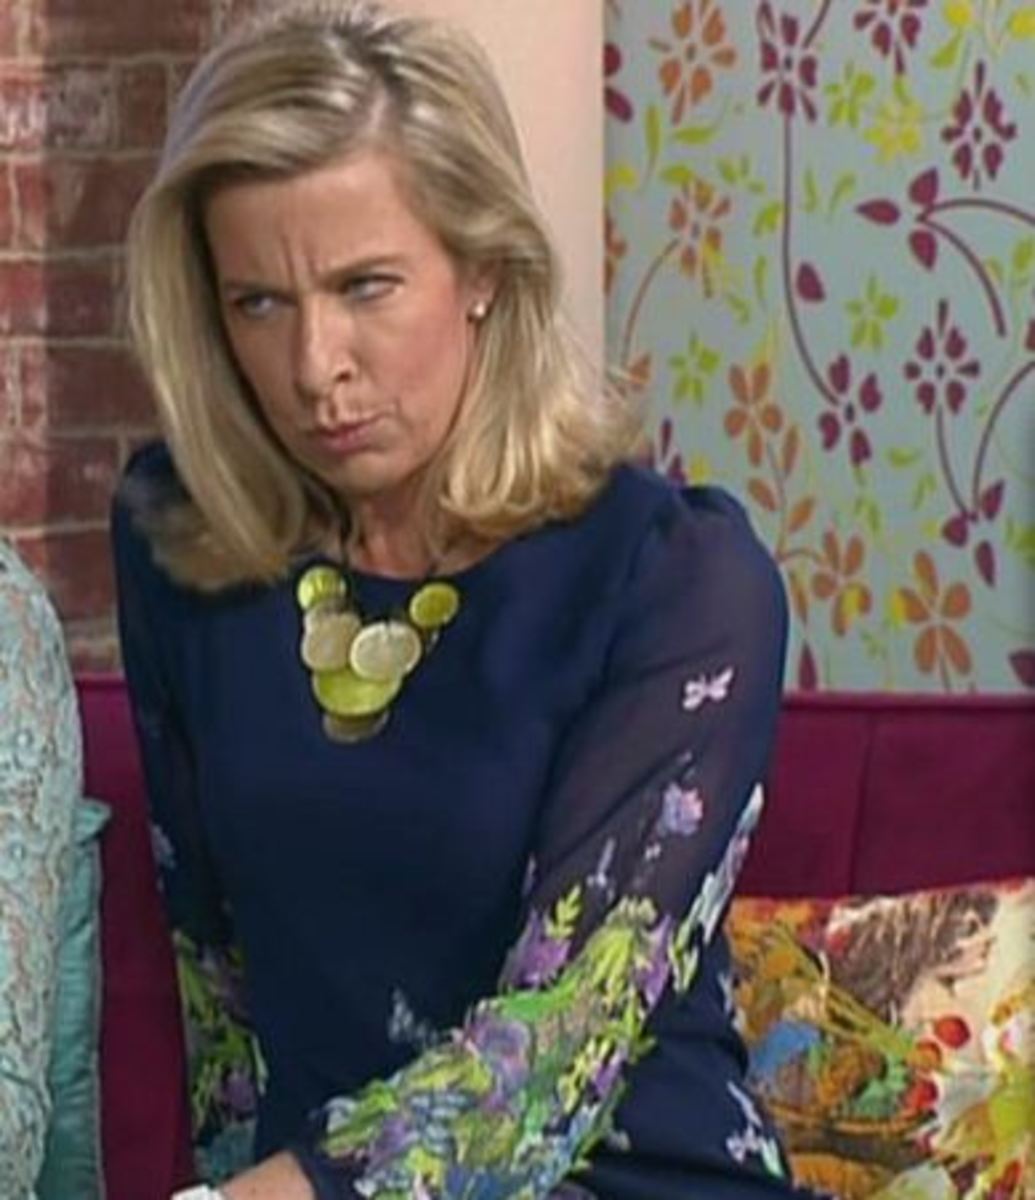 katie-hopkins-the-most-irrelevant-person-in-britain